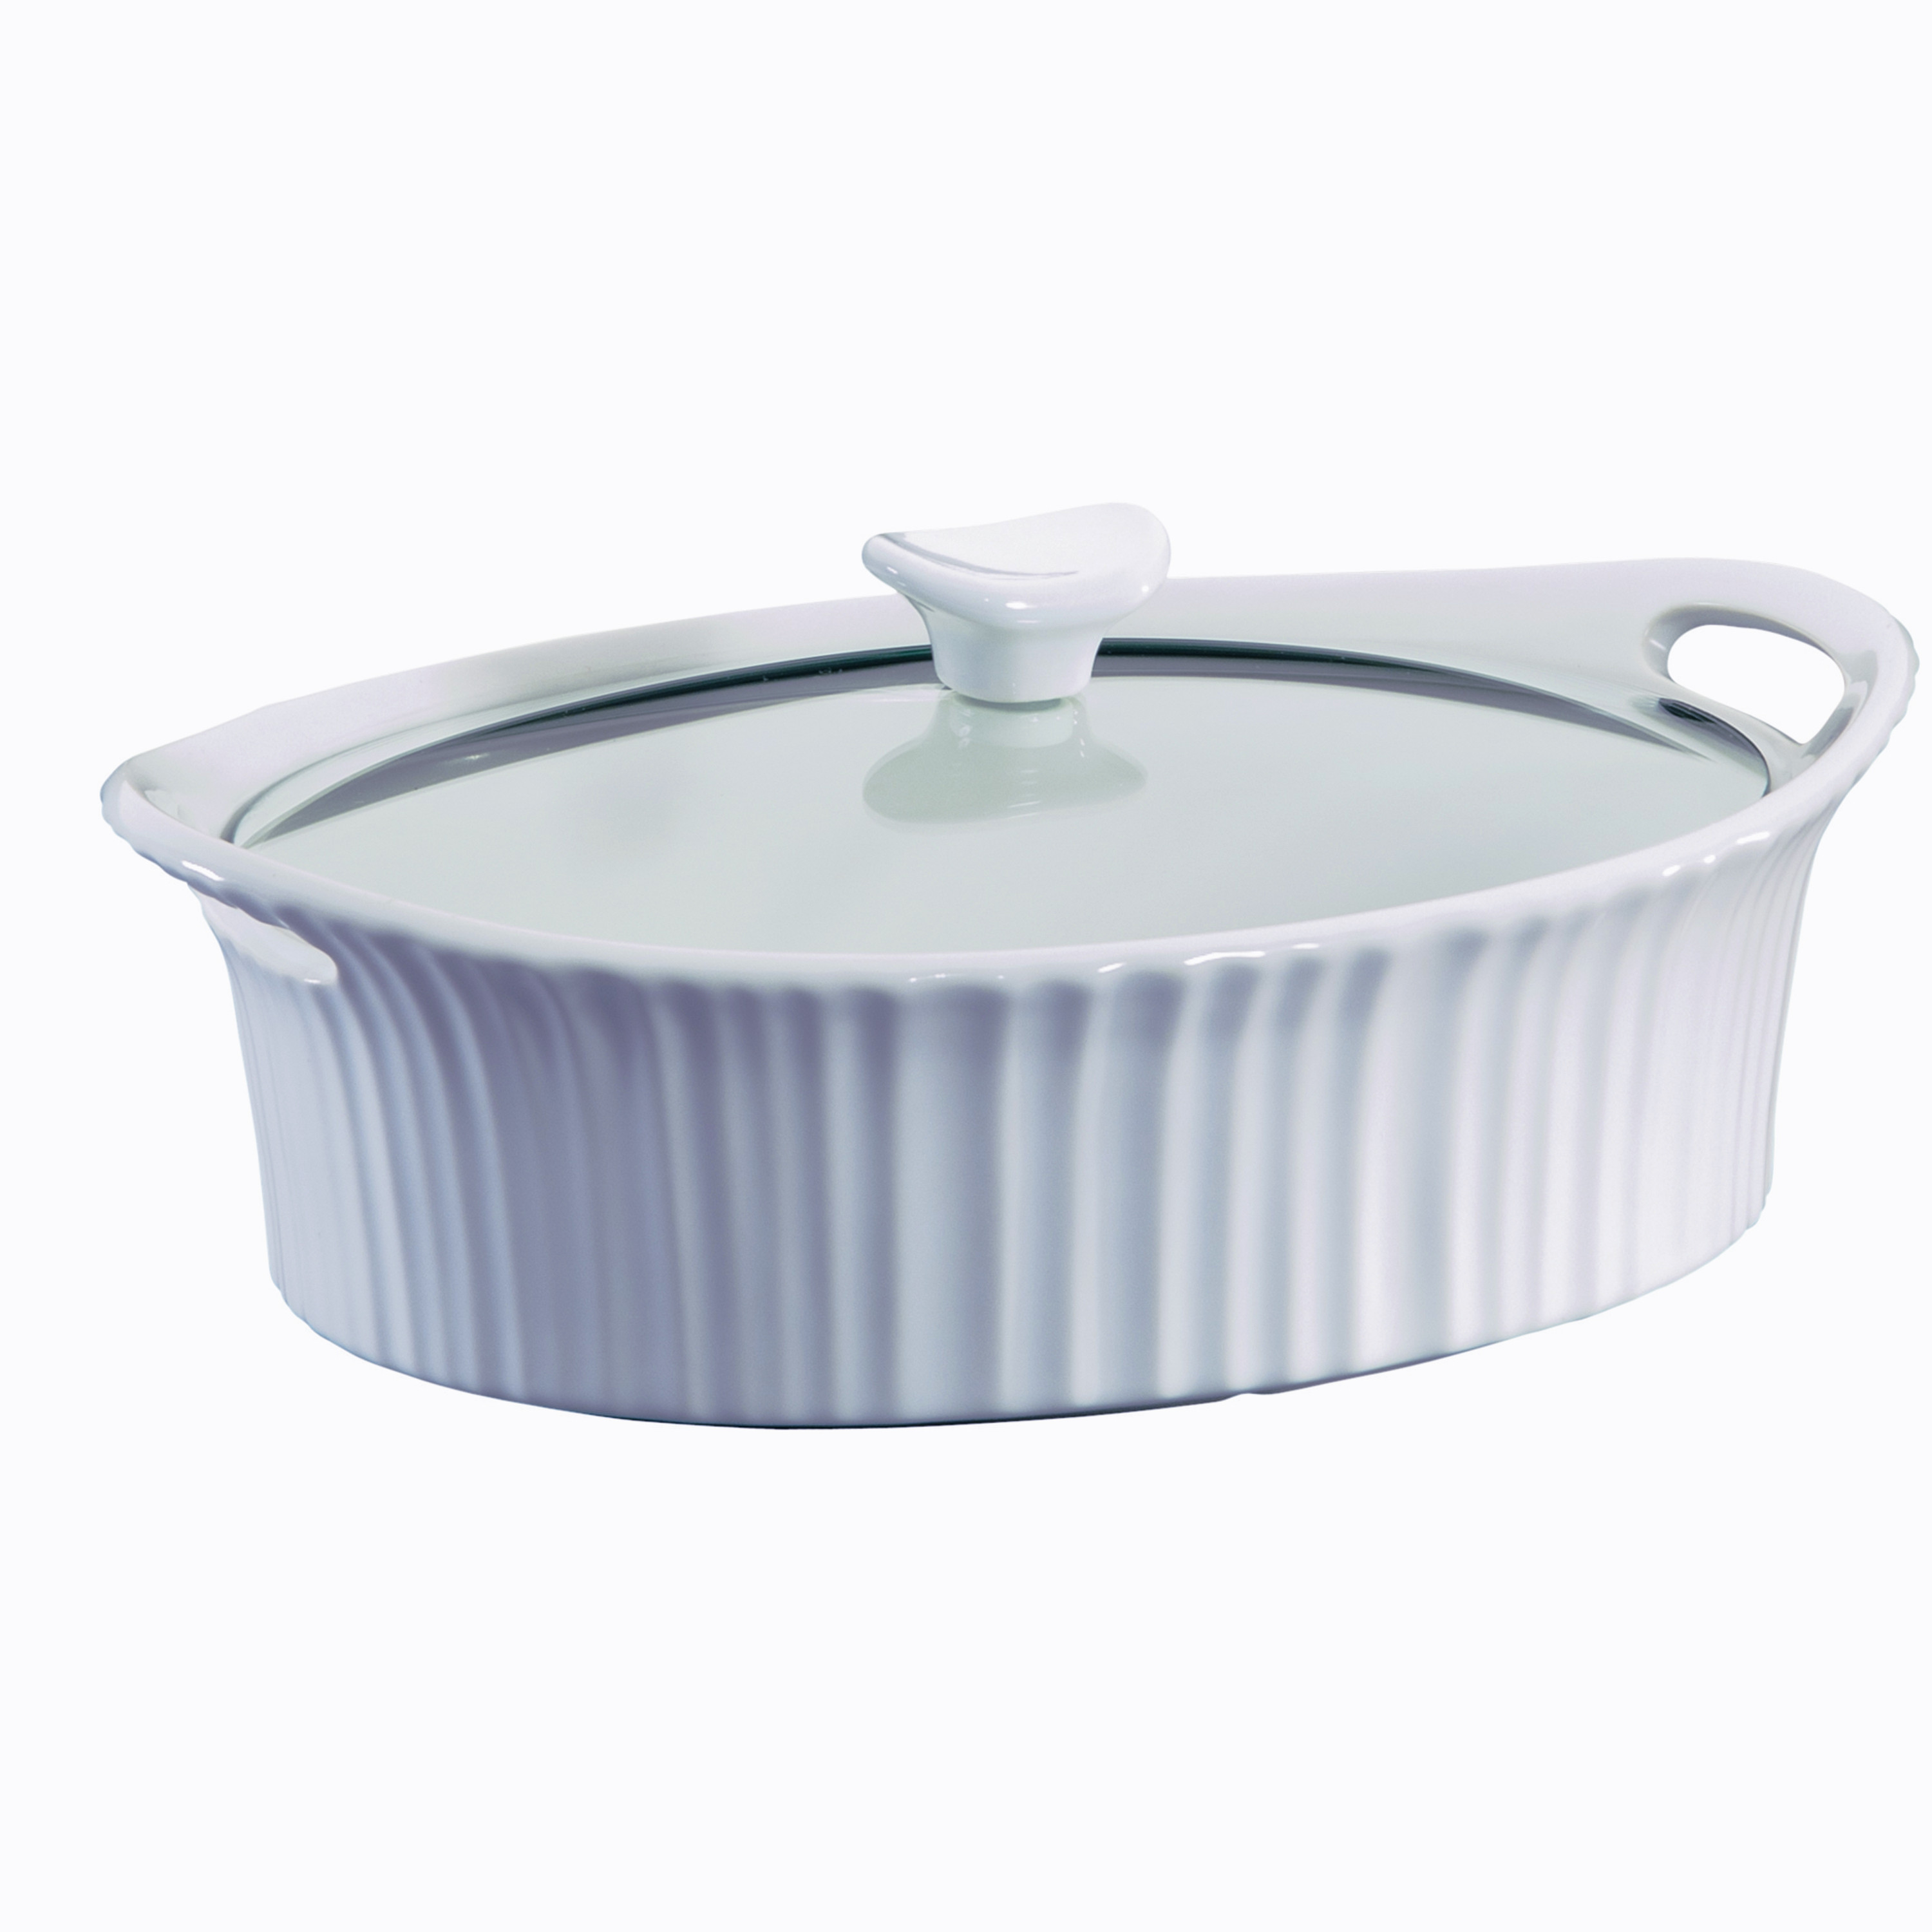 Corningware French White III 2.5-quart Round Casserole with Glass Cover